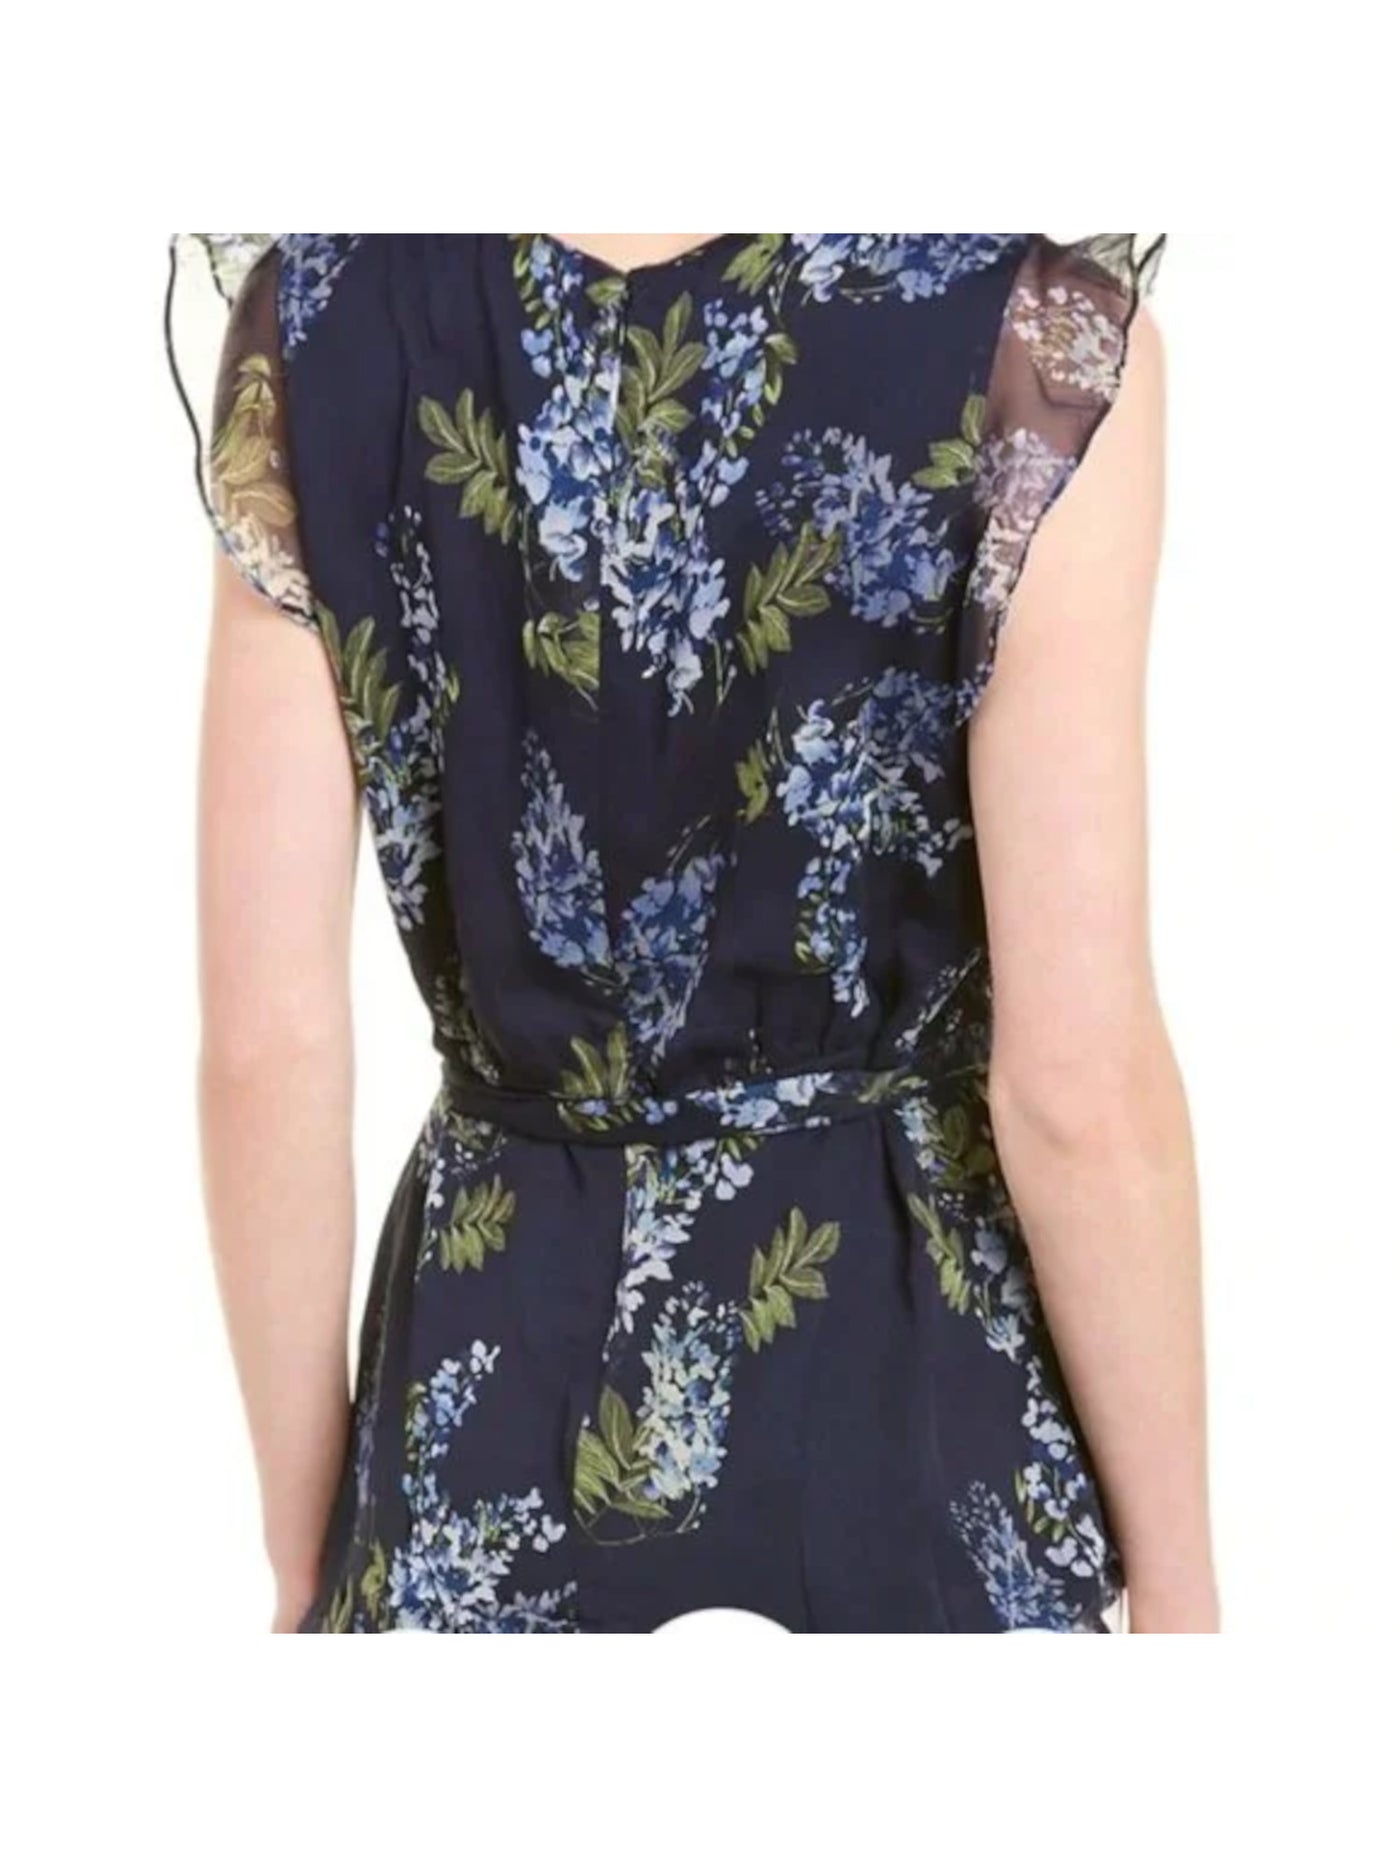 VINCE CAMUTO Womens Navy Zippered Sheer Lined Tie Snap Closure Front Floral Sleeveless V Neck Top S